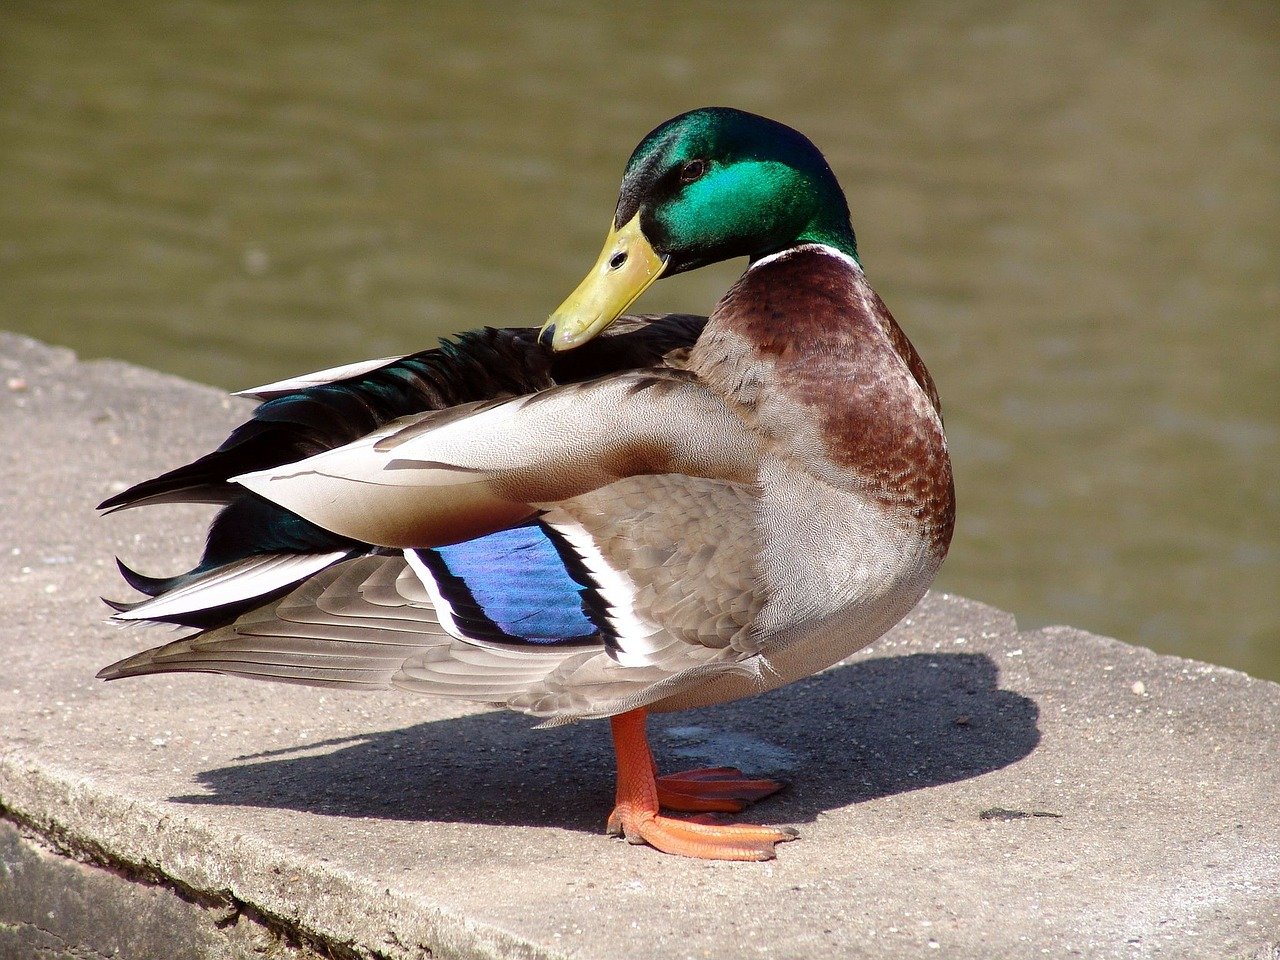 A wild duck standing next to a river on a concrete wall. I Image: Pixabay